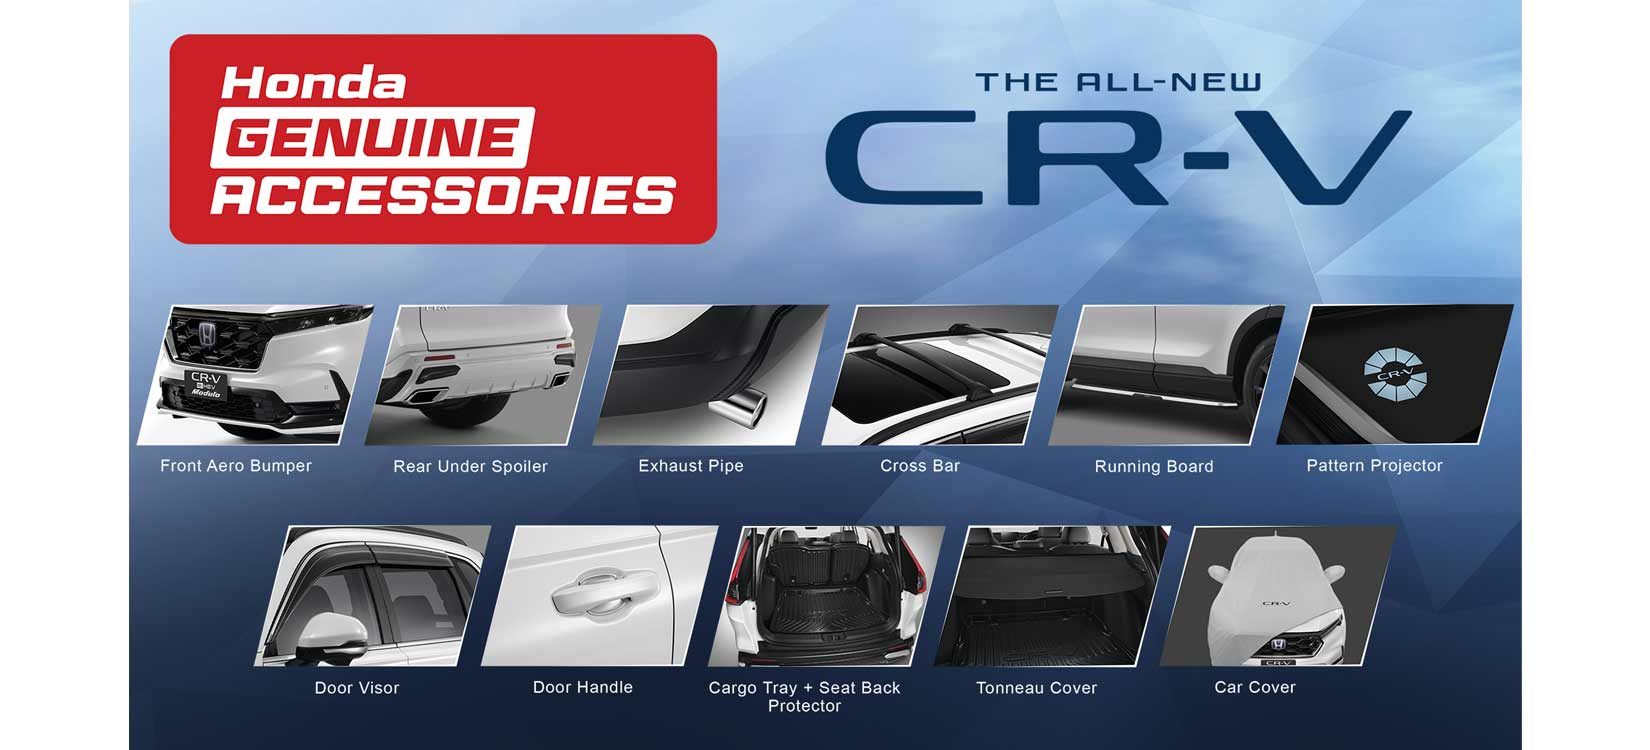 Personalize your All-New Honda CR-V with Honda Genuine Accessories